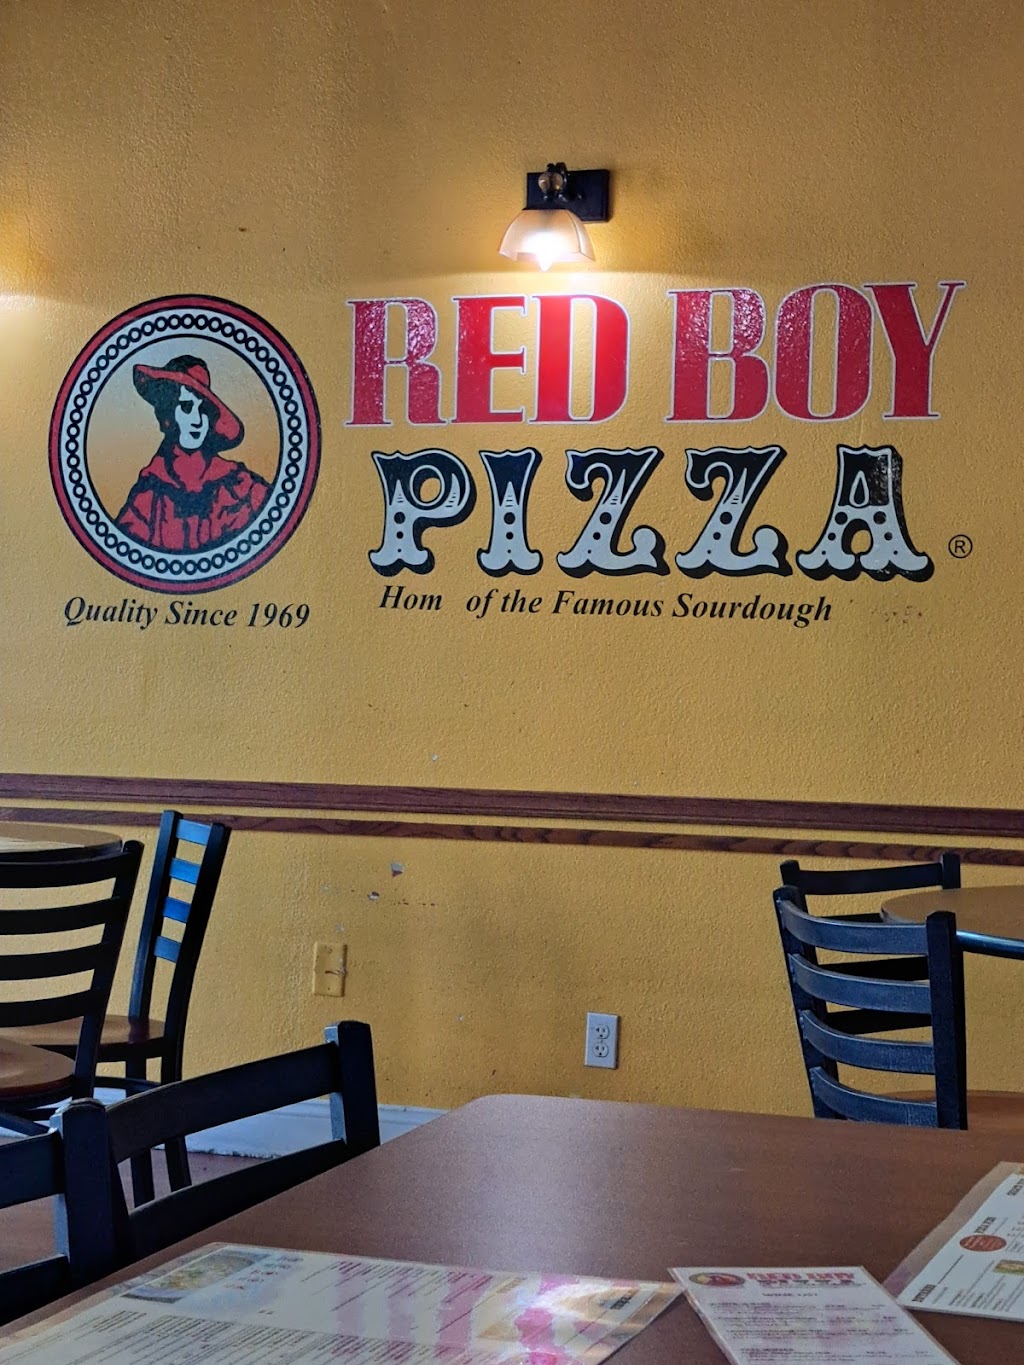 Red Boy Pizza Redwood Road | 4100 Redwood Rd #15, Oakland, CA 94619 | Phone: (510) 531-3330